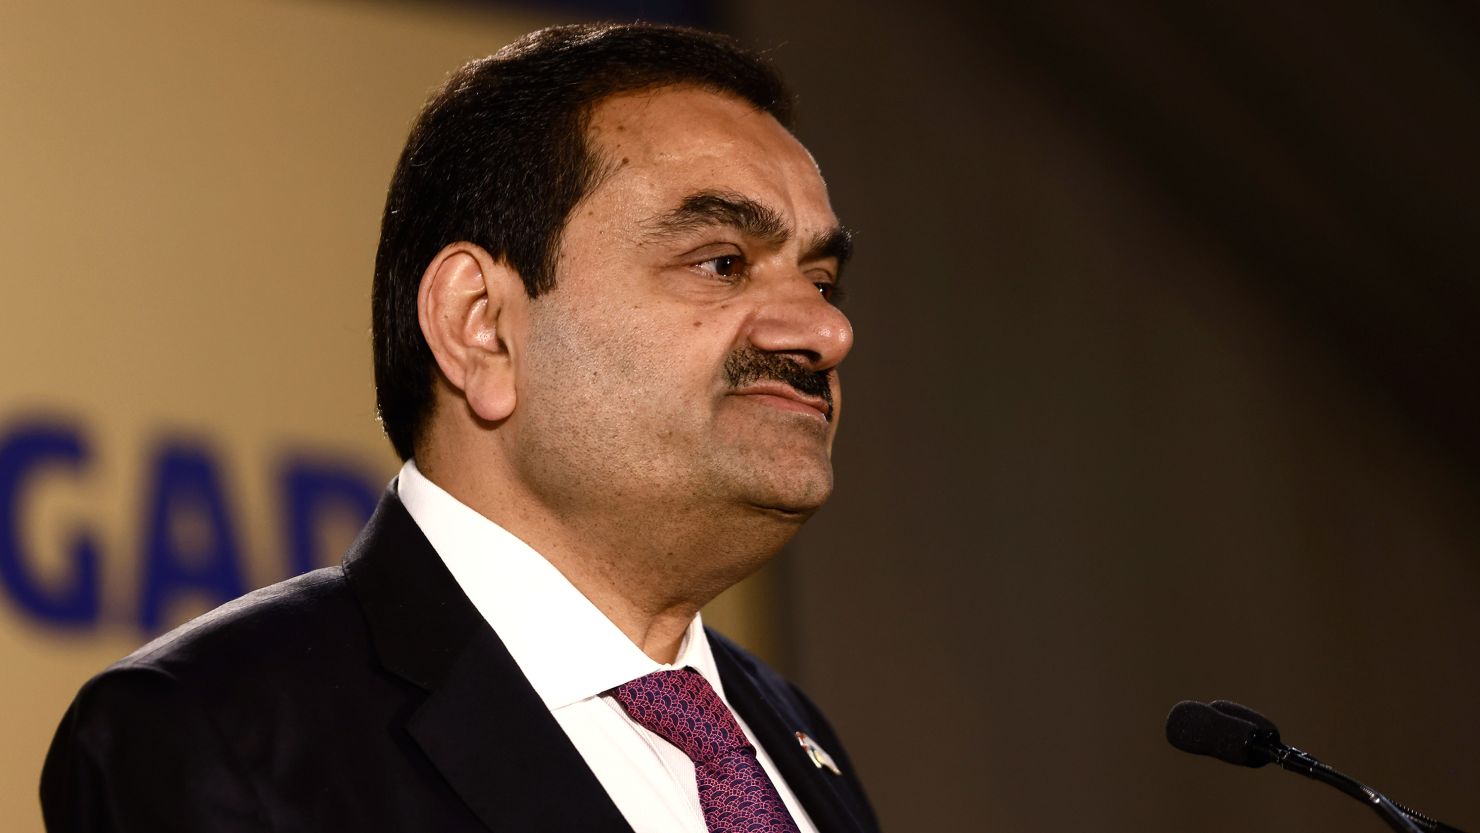 Gautam Adani lost half his fortune earlier this year when shares in his conglomerate plunged in the wake of fraud allegations by a short seller, Hindenburg Research.